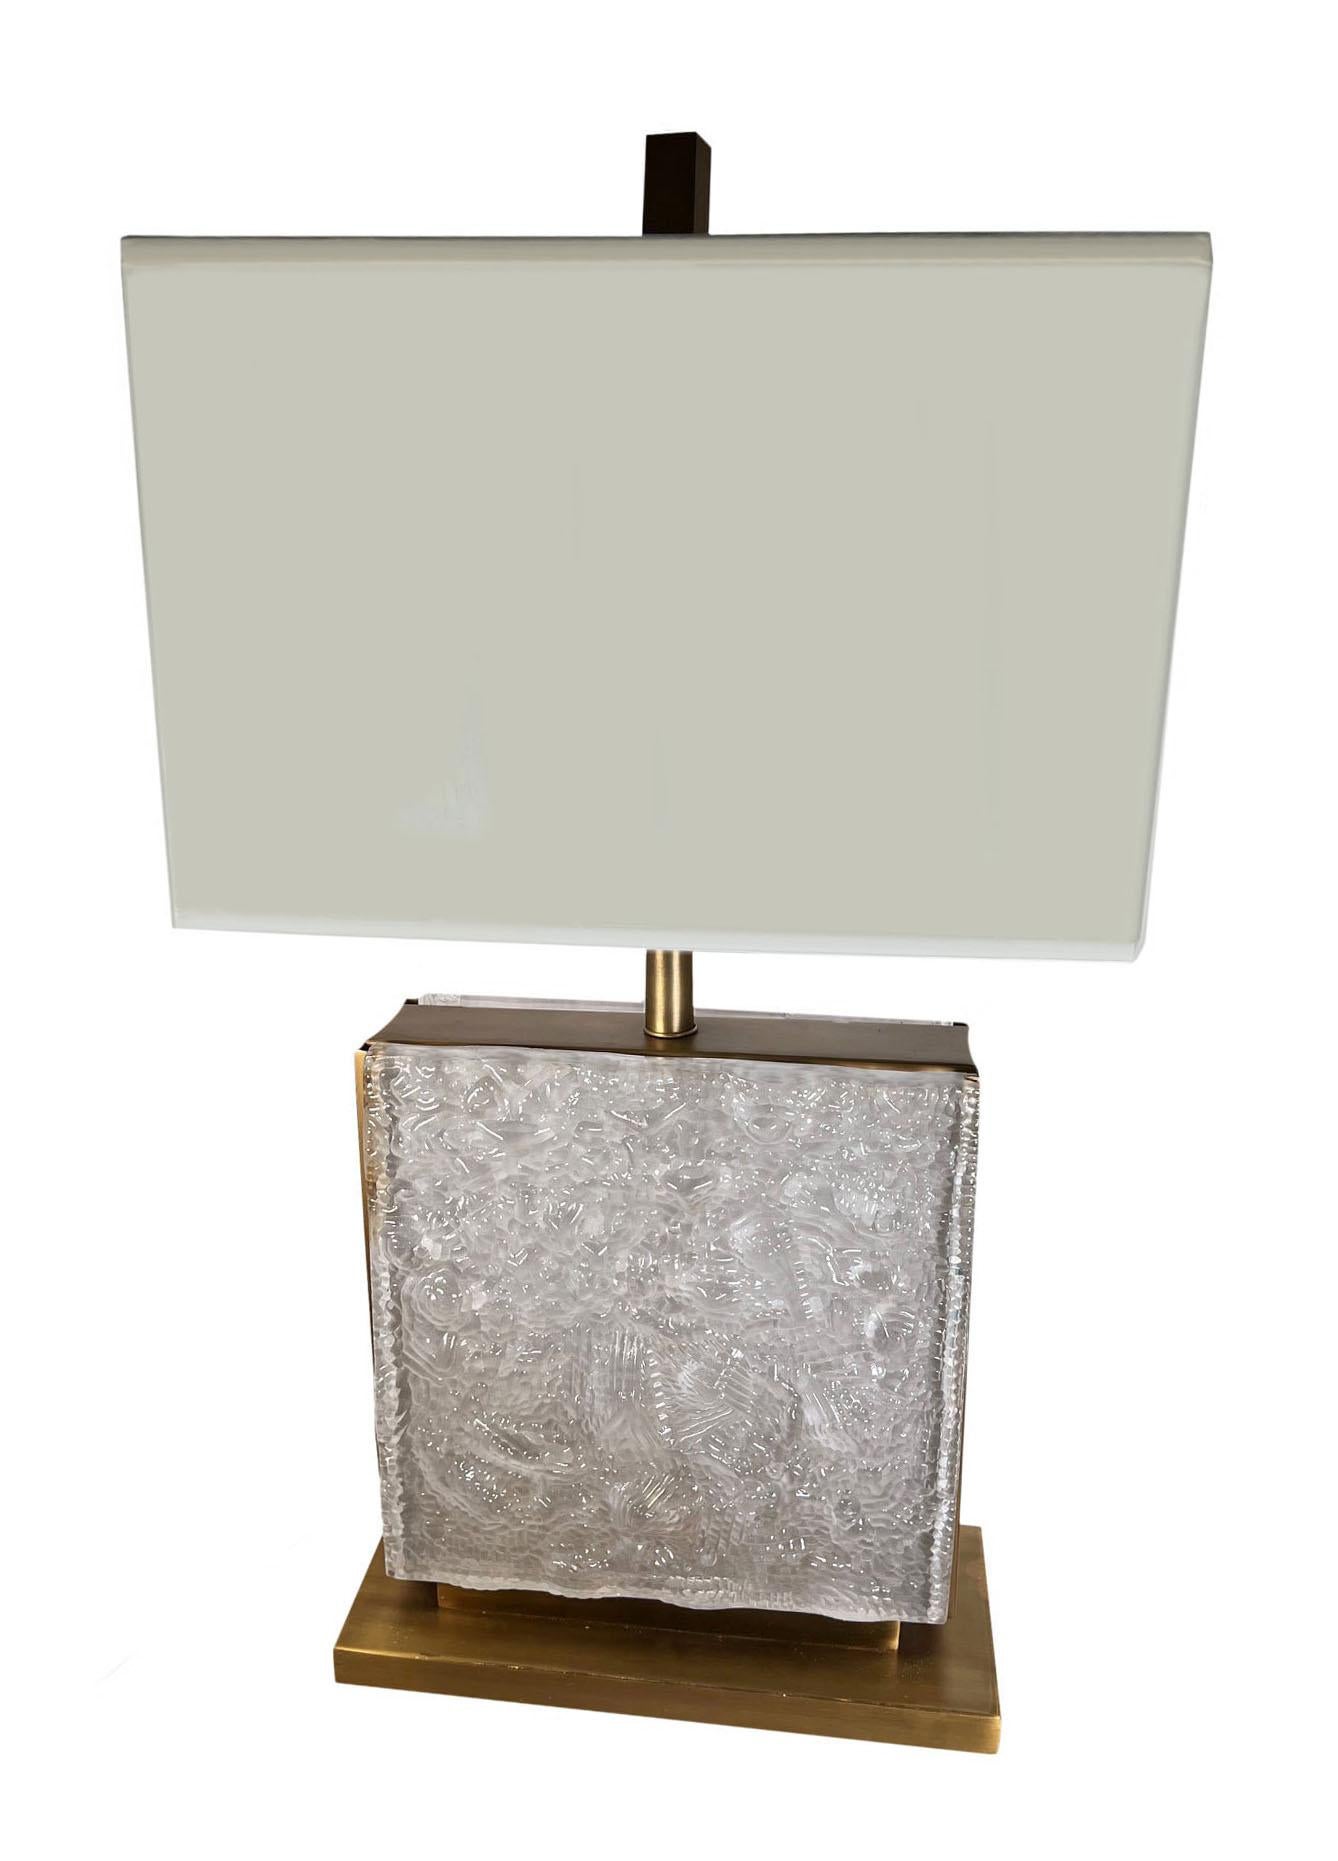 A pair of glamorous Lalique style square lamps with carved frosted glass on both the front and the back, there are two sheets of frosted glass on each lamp. Lampshades are included and the light bulb sits inside between each piece of glass. 